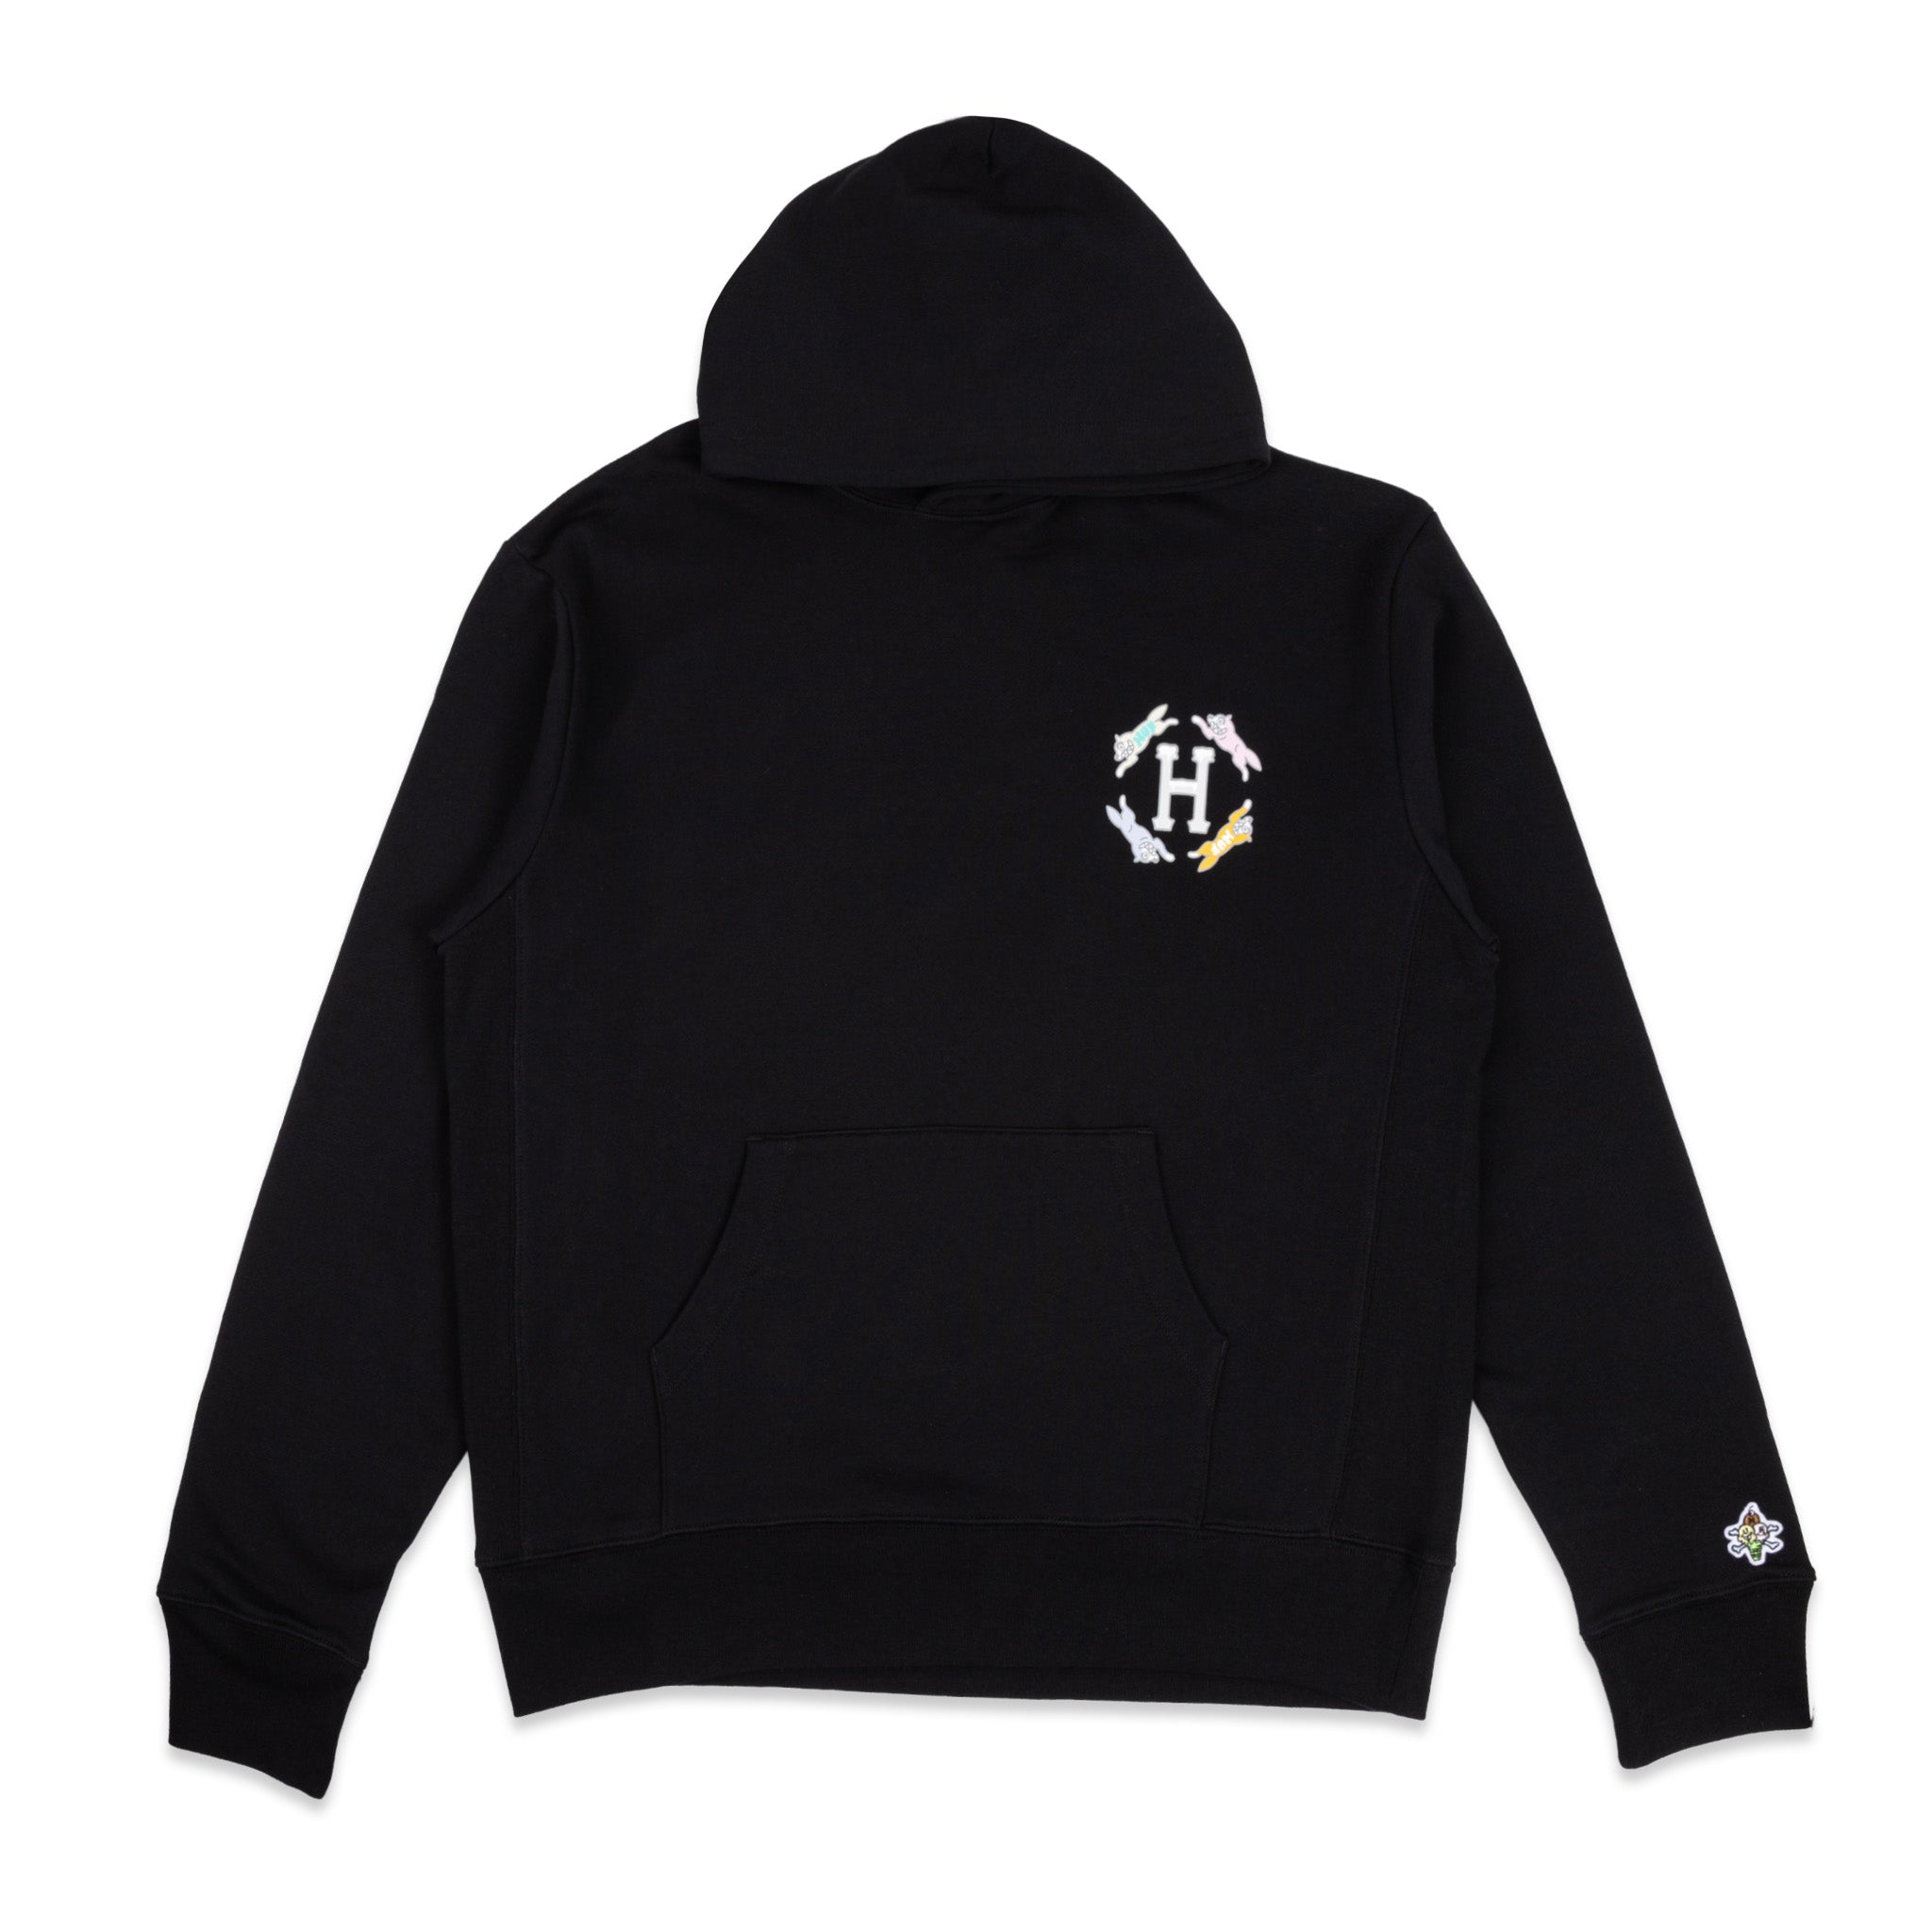 ICECREAM X FROSTED HOODIE - BLACK